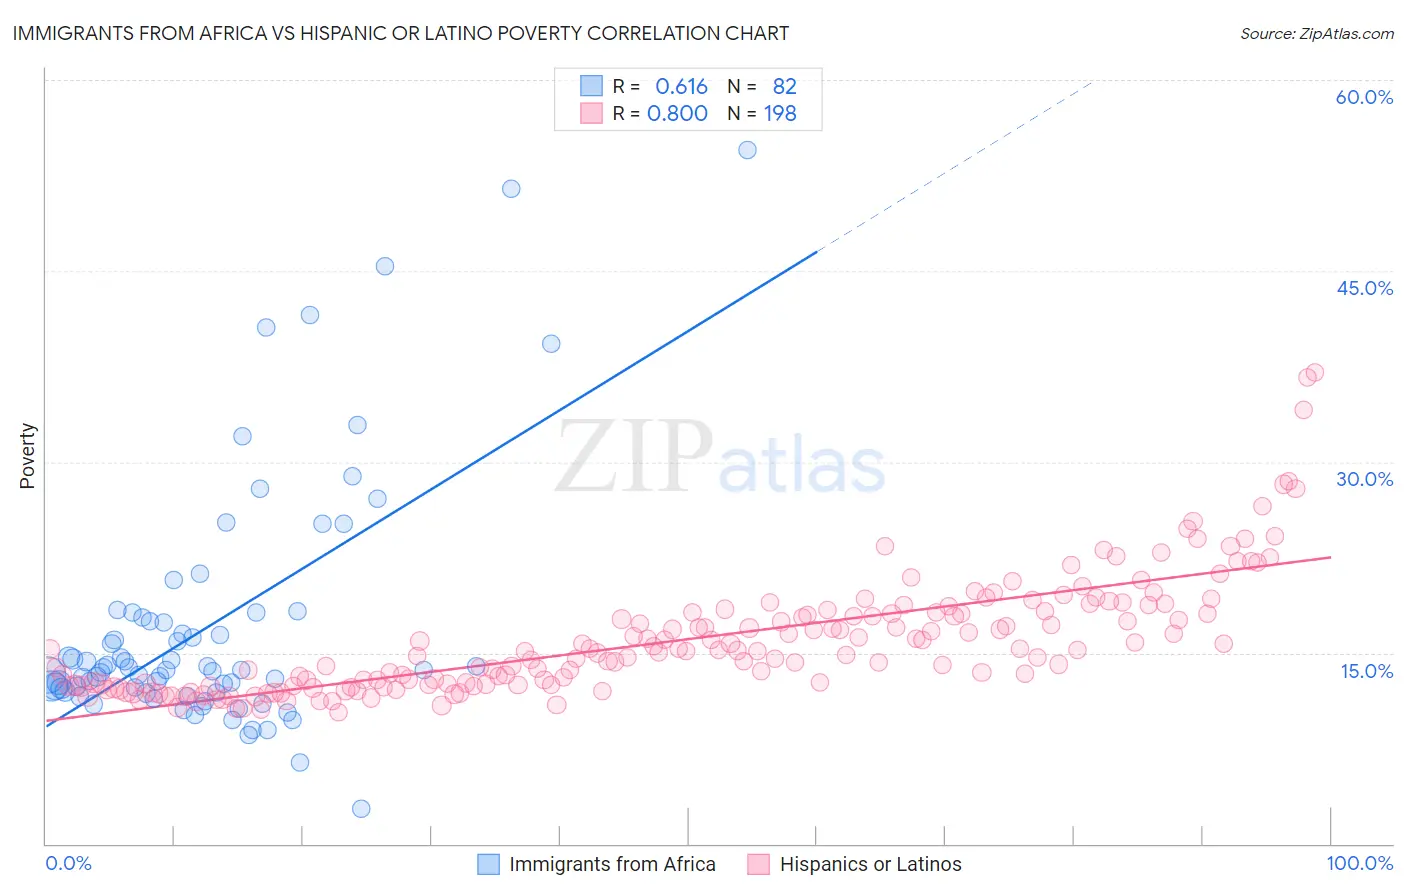 Immigrants from Africa vs Hispanic or Latino Poverty